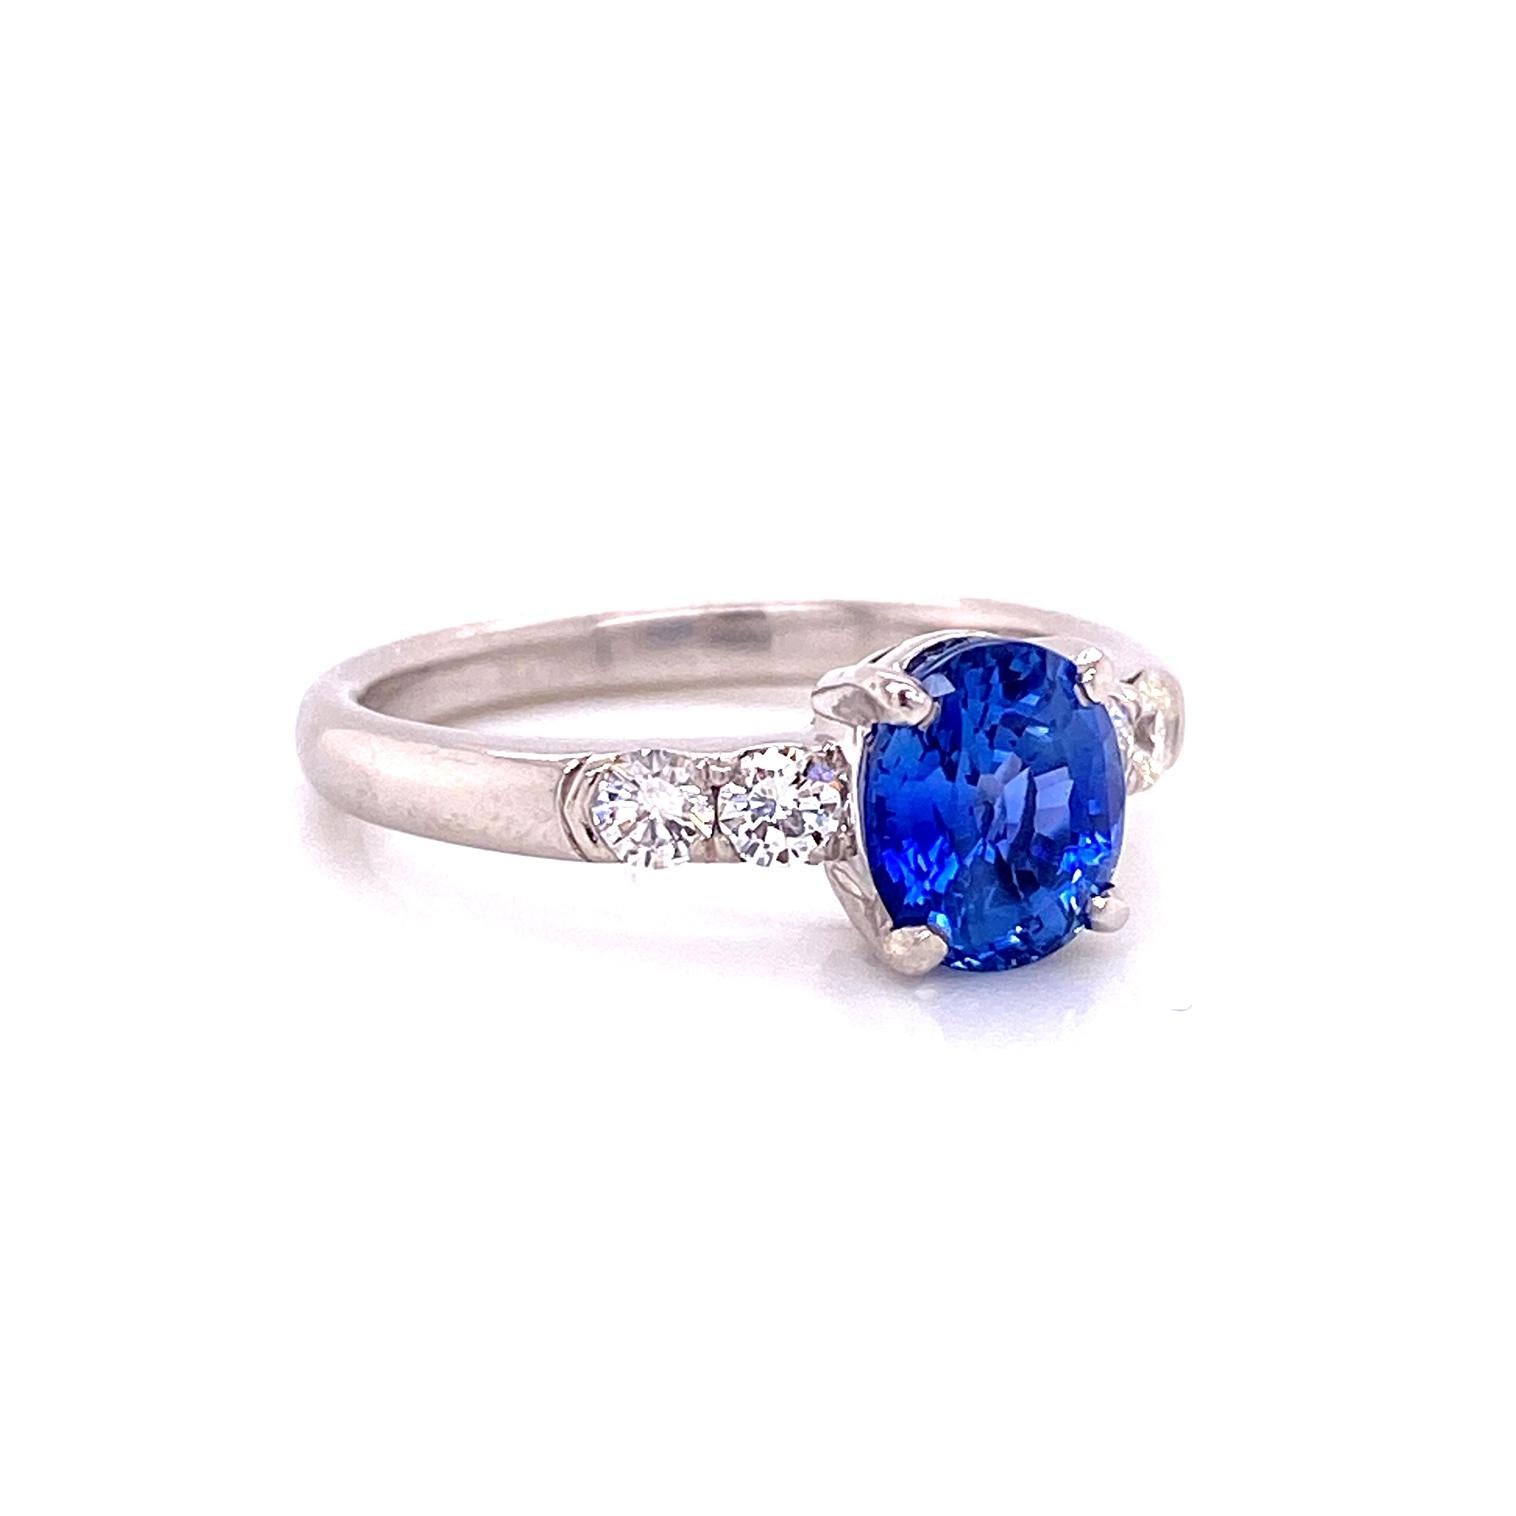 A ladies platinum ring set with an 1.60 carat oval sapphire and 0.29 total carat weight white diamonds, F color VS clarity. Ring size 6.5.
Model shown with Blue Sapphire Baguette Band, sold separately.
